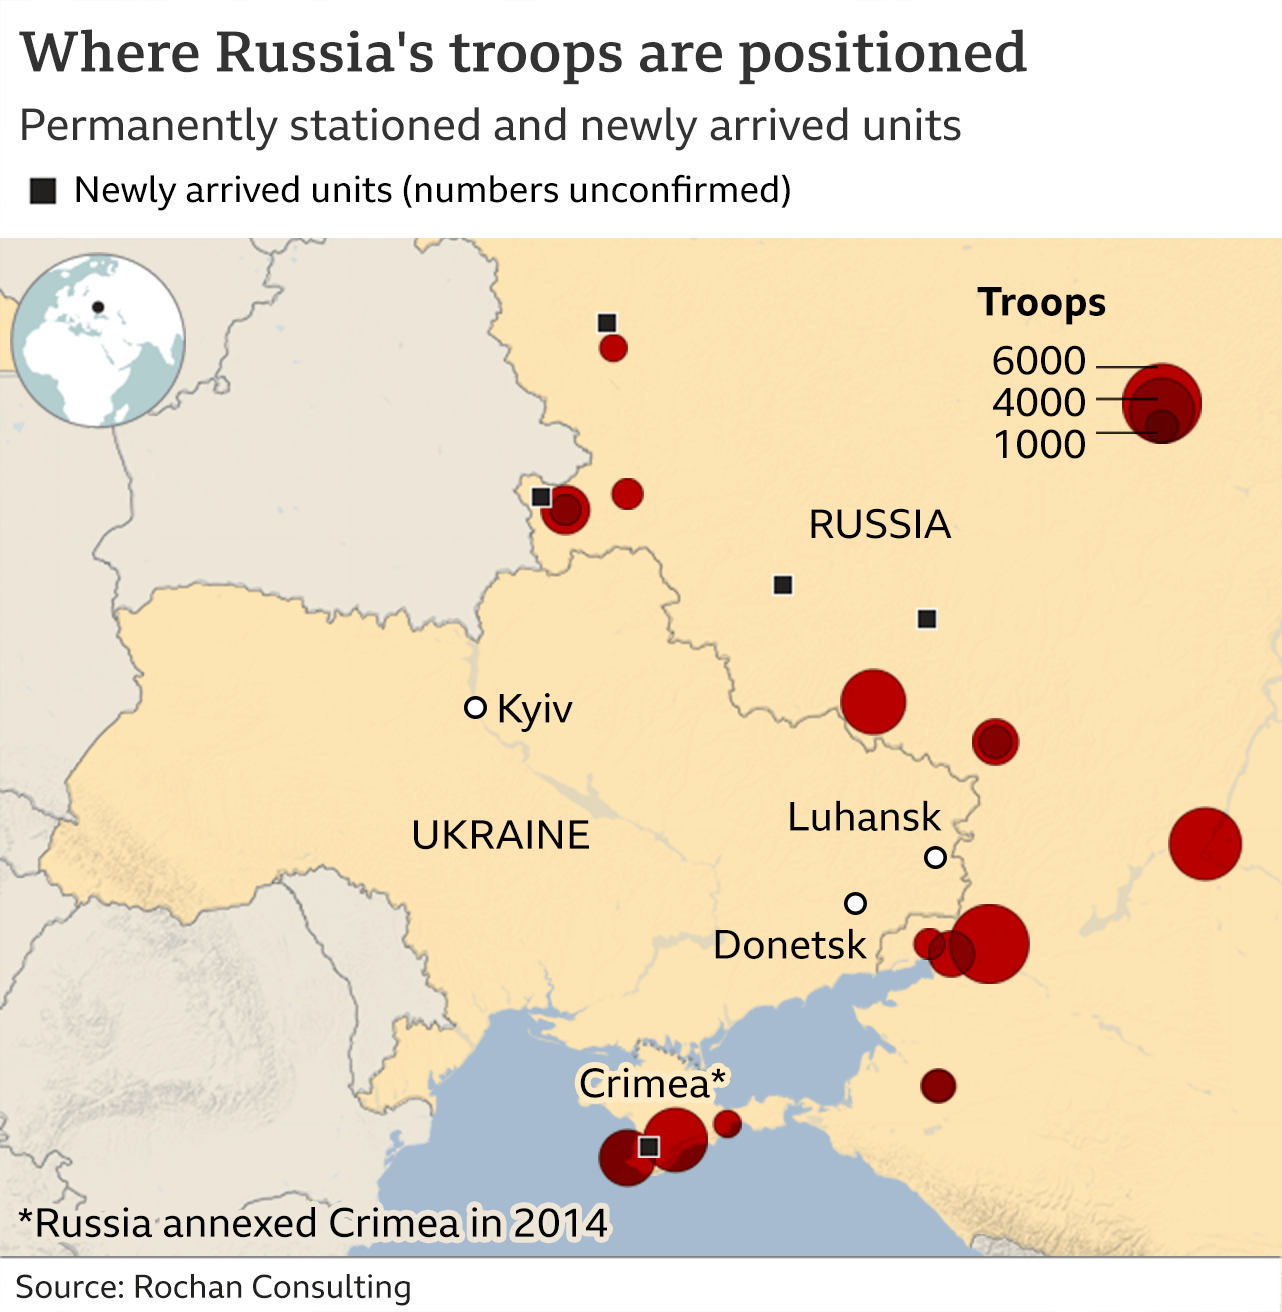 Map shows where Russia's troops are positioned